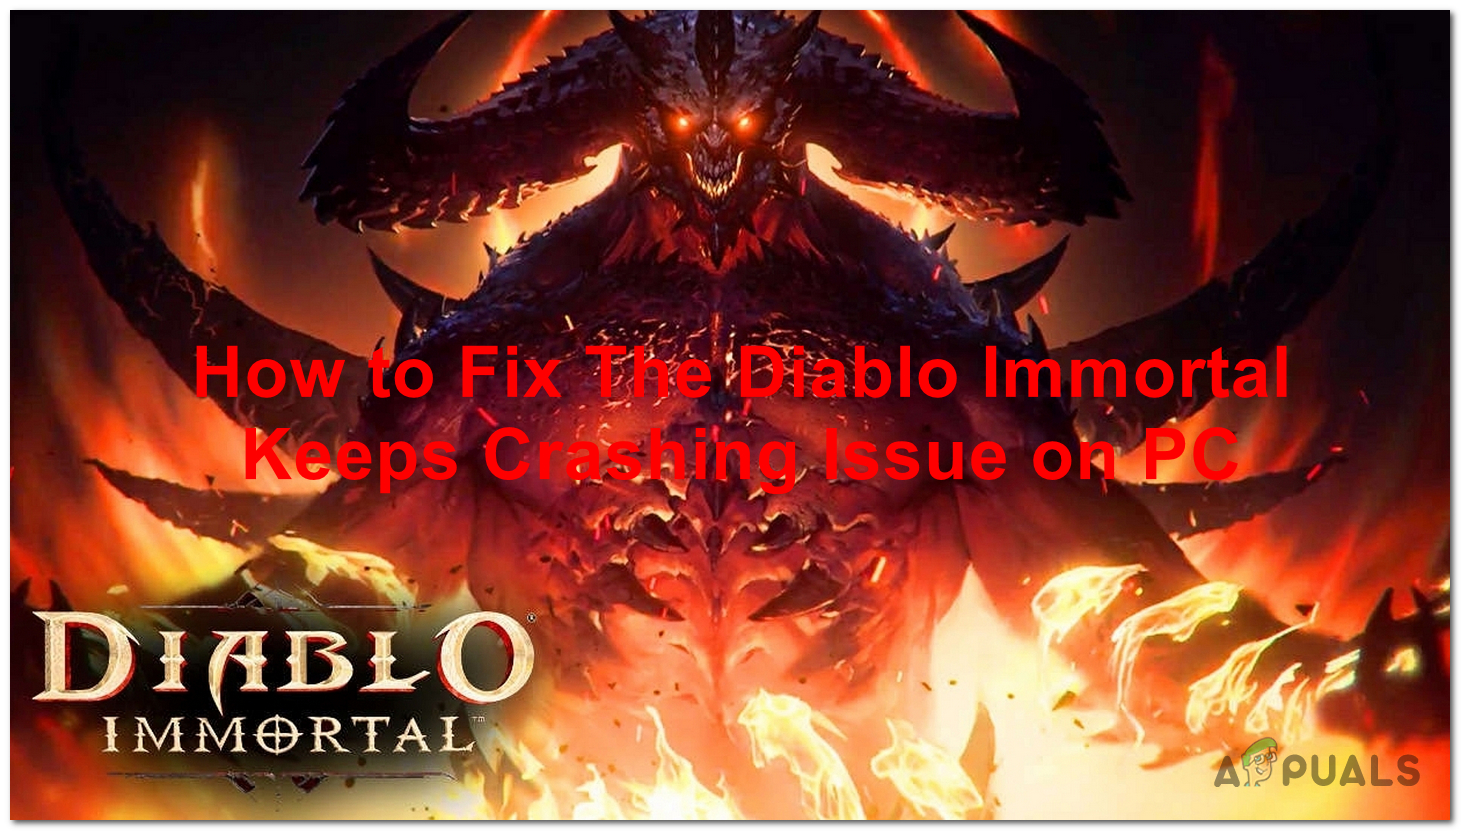 How to Fix Diablo Immortal Keeps Crashing Issue on PC? - 